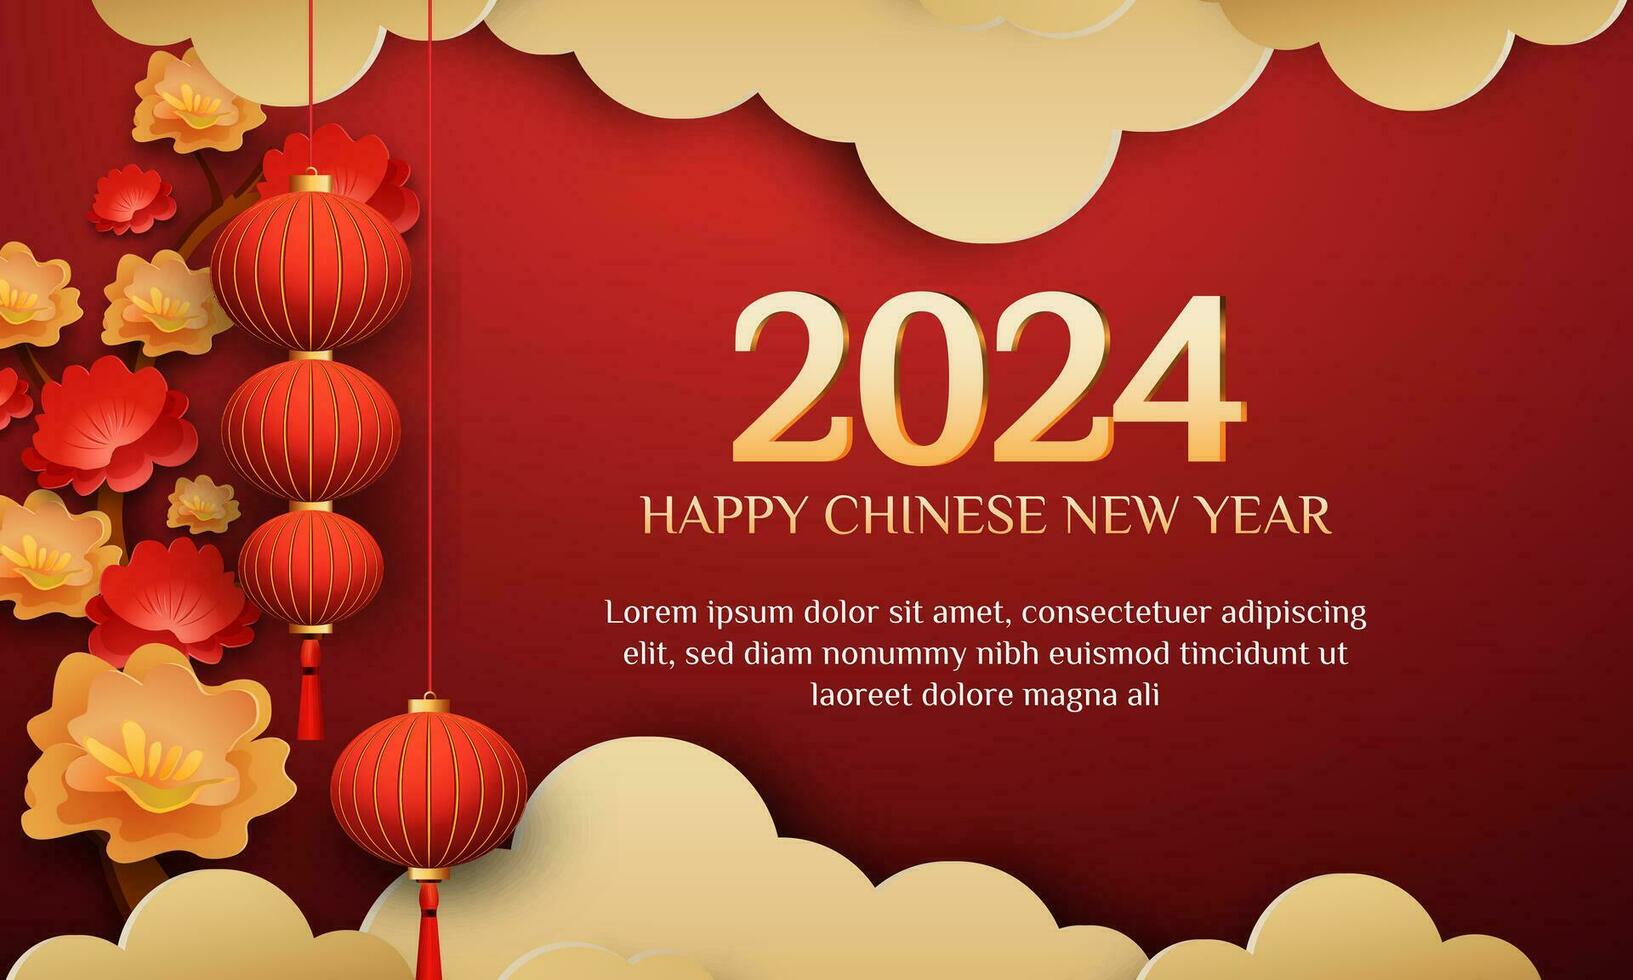 Chinese New Year 2024 3d background with lantern, gate, red and gold flower, cloud for banner, greeting card vector